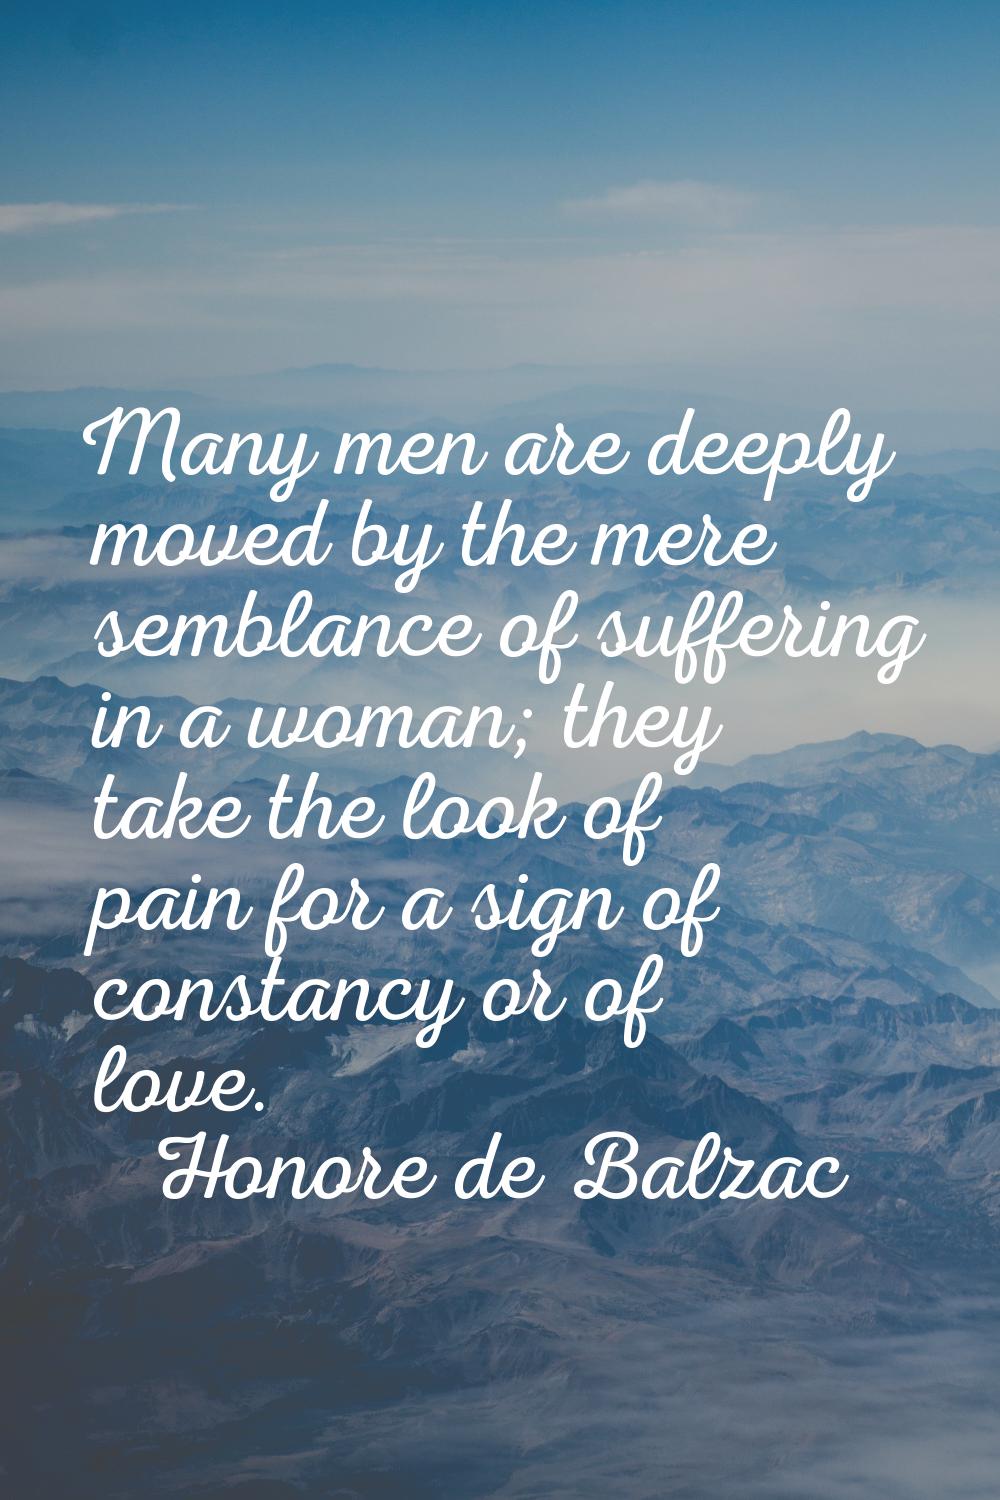 Many men are deeply moved by the mere semblance of suffering in a woman; they take the look of pain